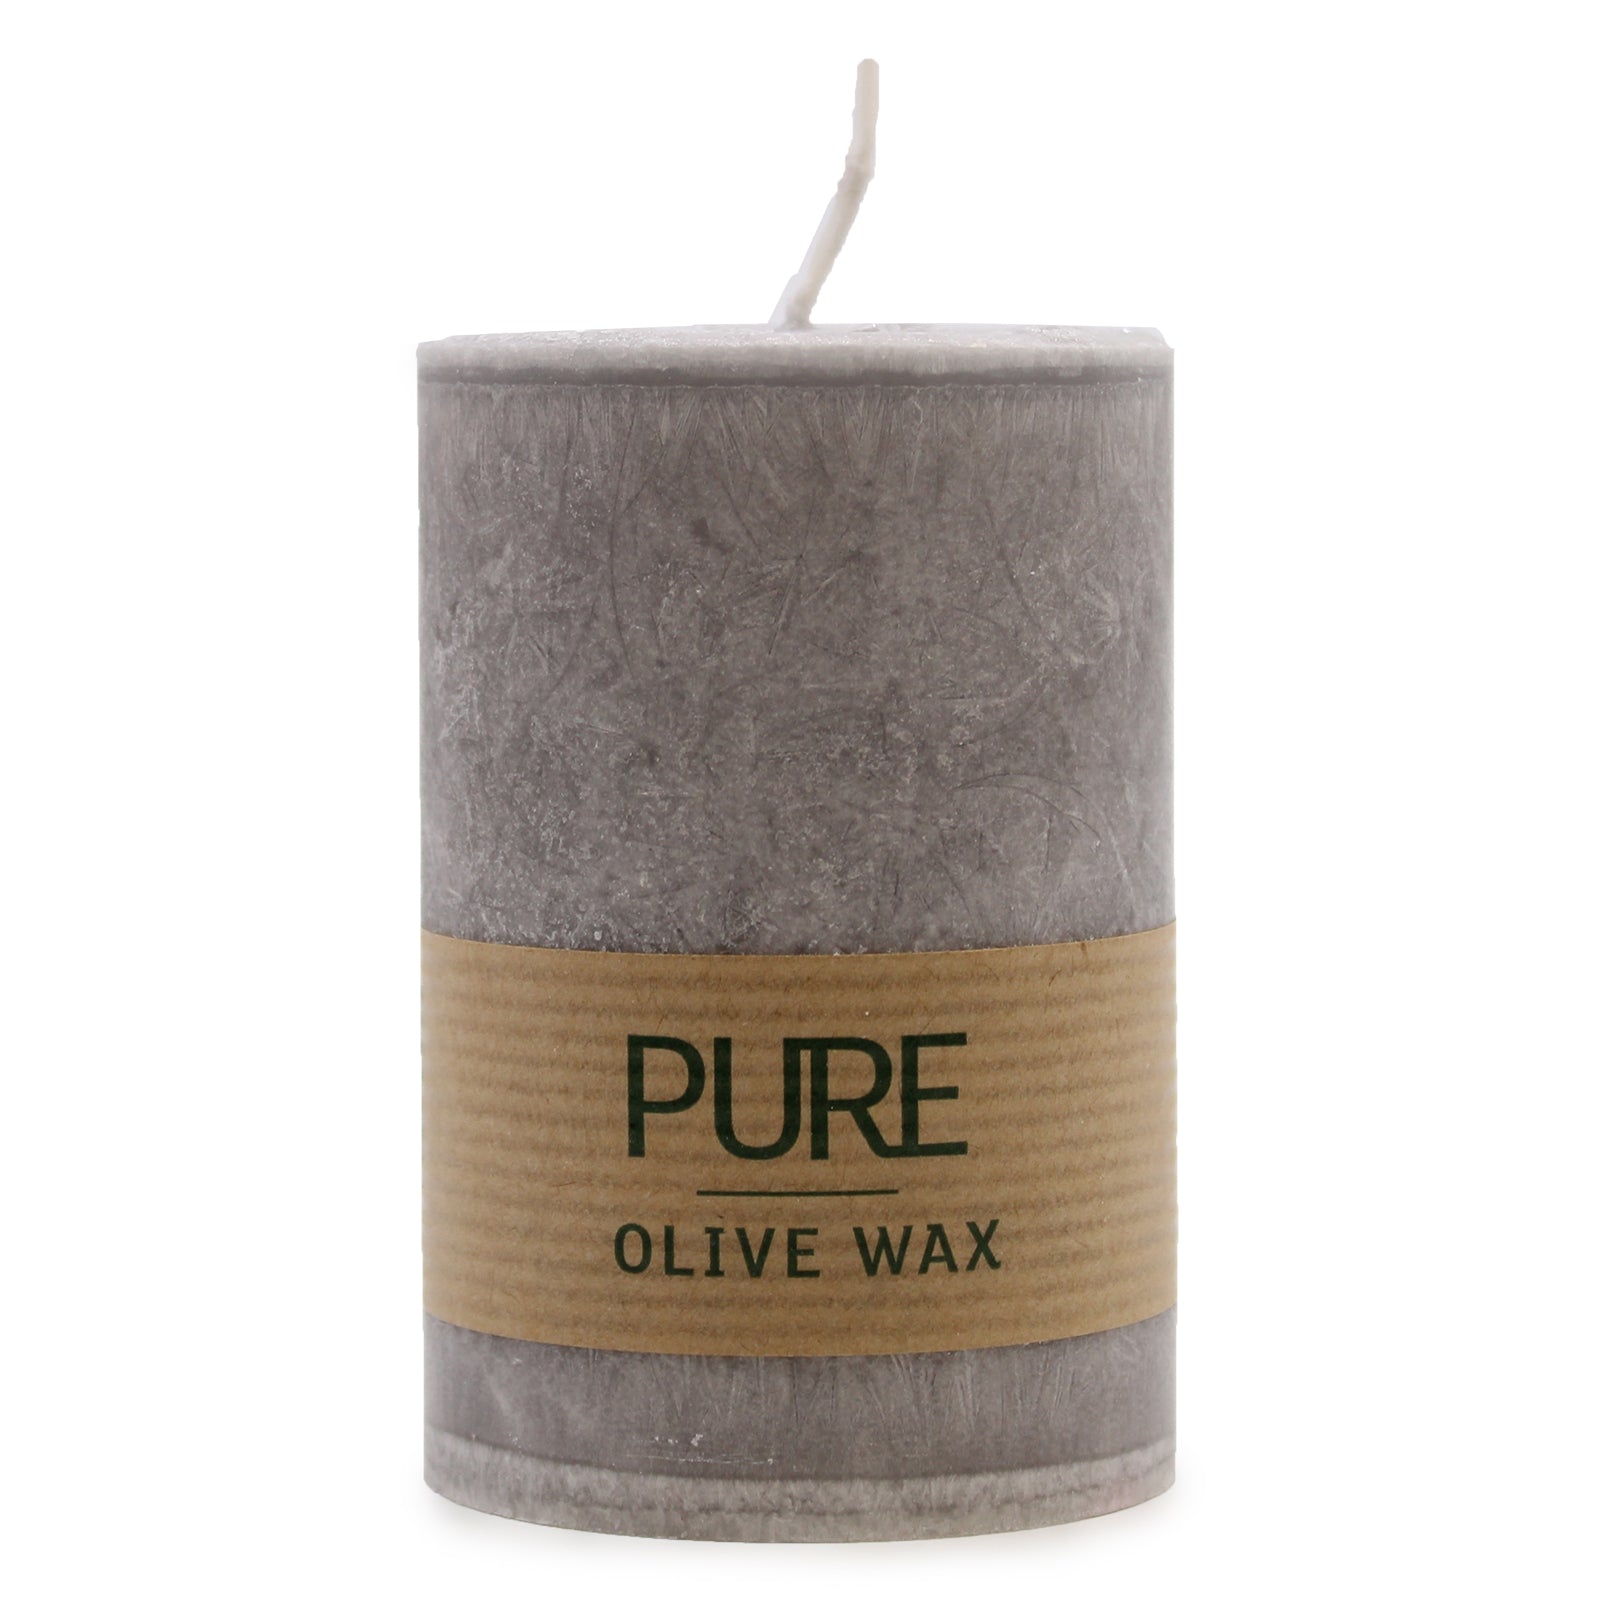 View Pure Olive Wax Candle 90x60 Grey information